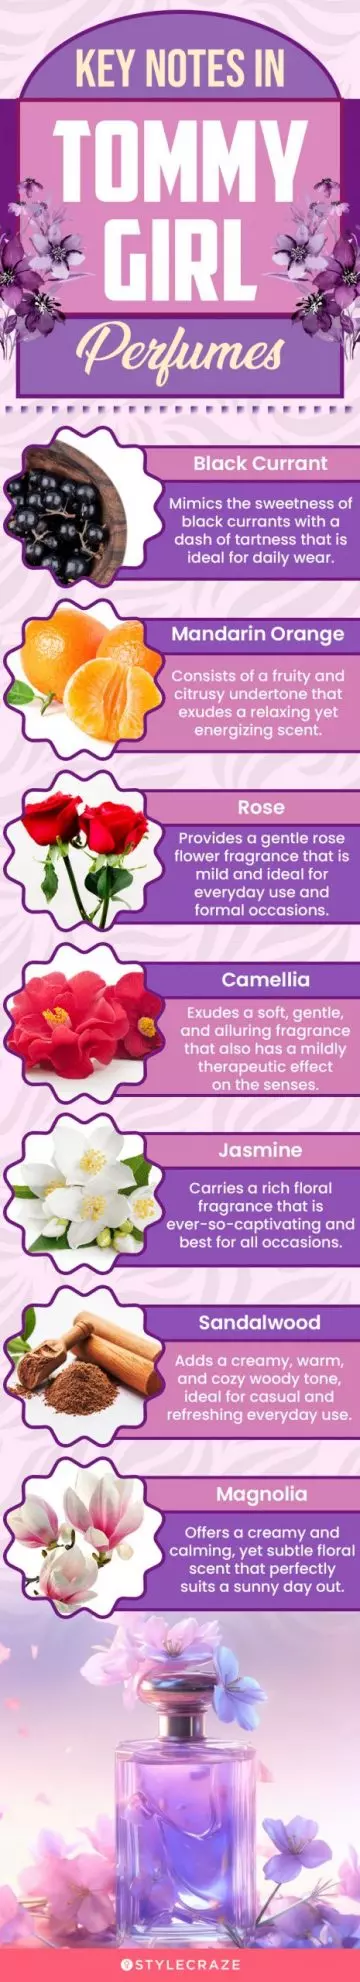 Key Notes In Tommy Girl Perfumes (infographic)